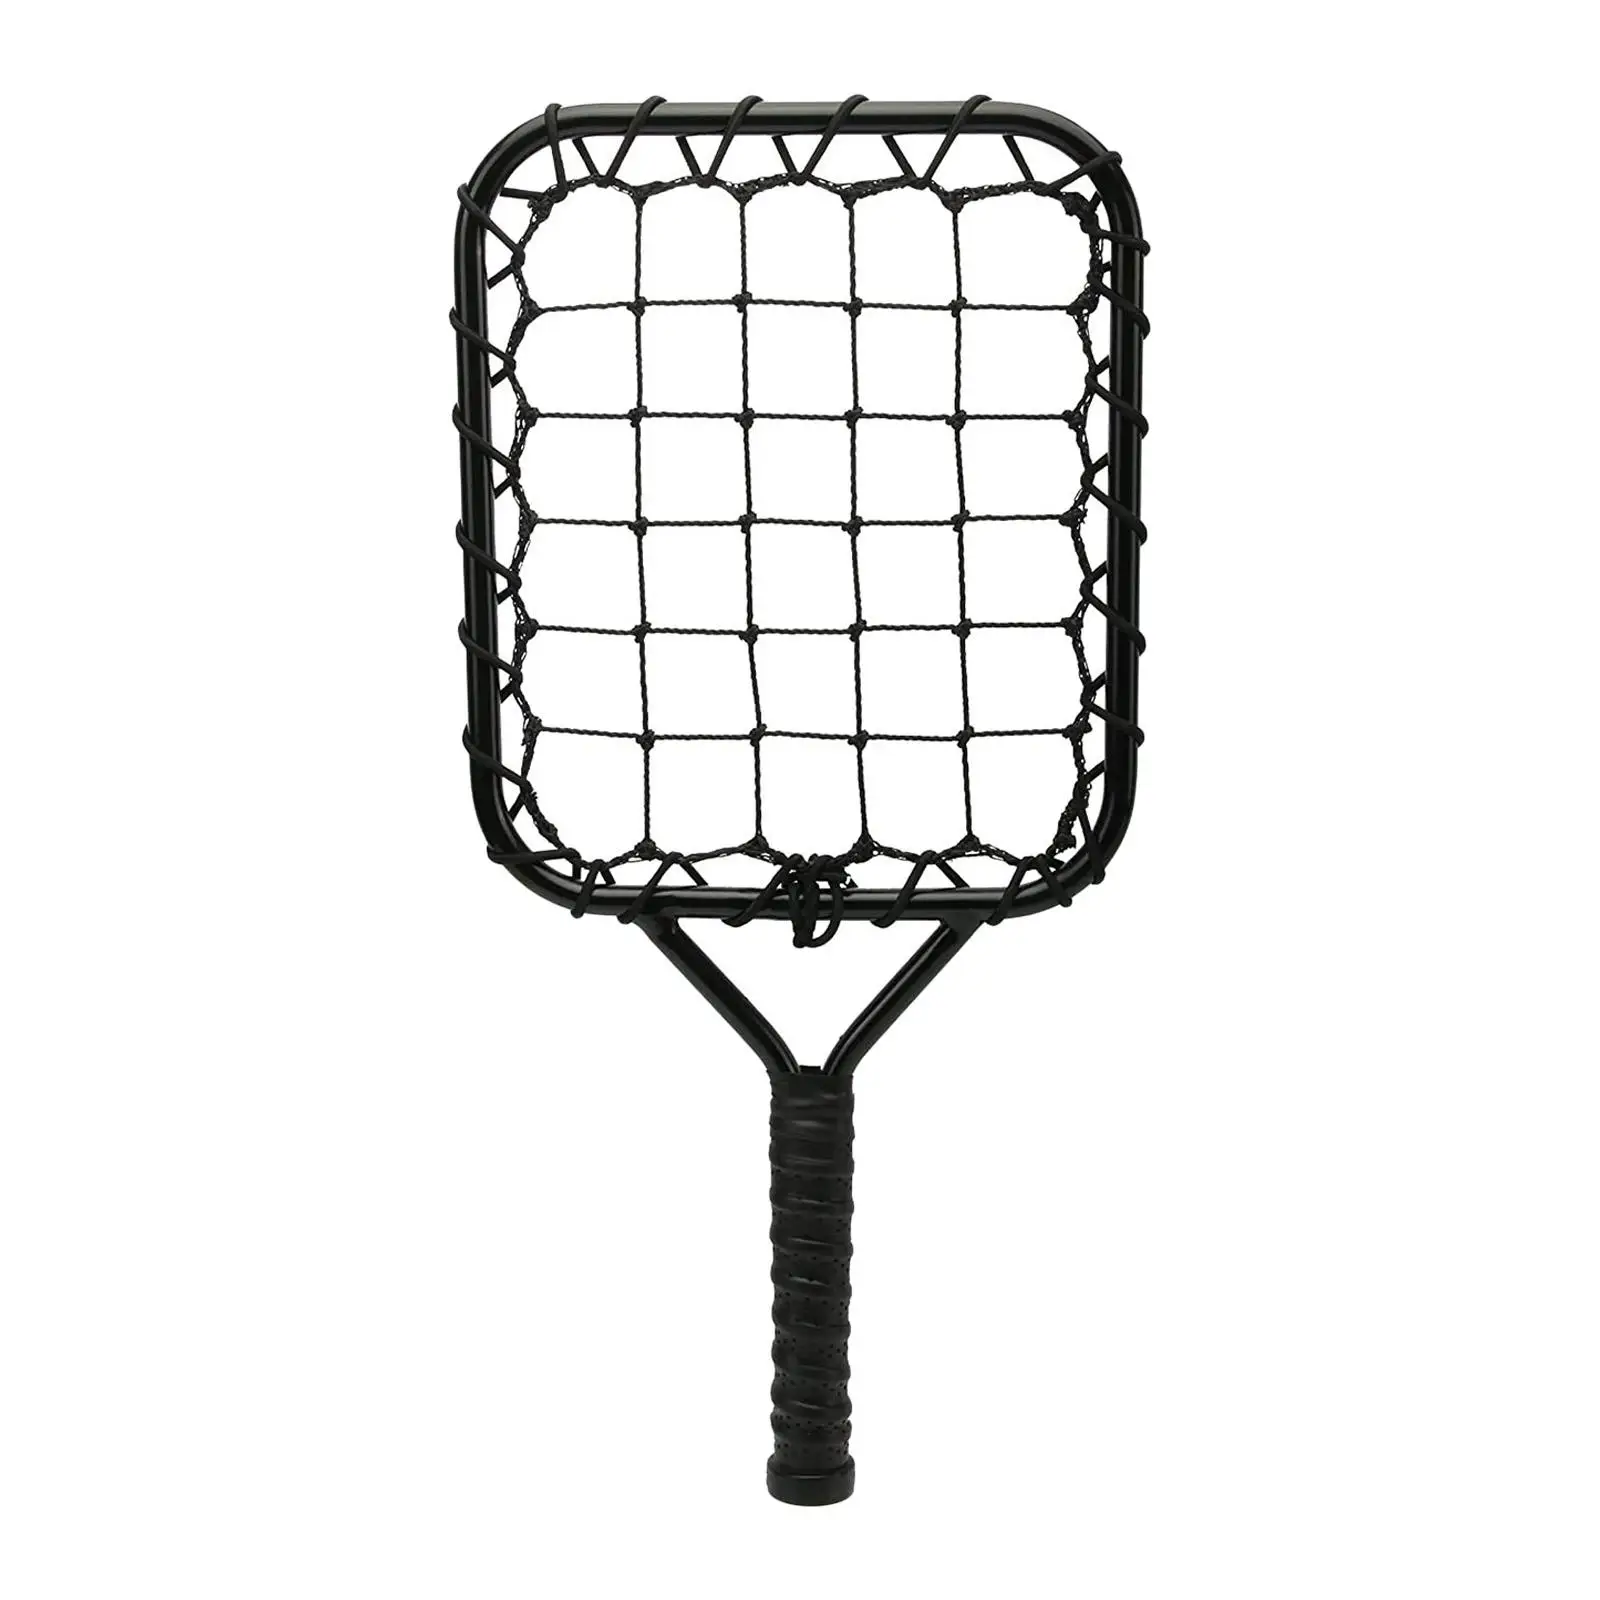 Baseball Racquet Much More Control and Accuracy Baseball Essentials